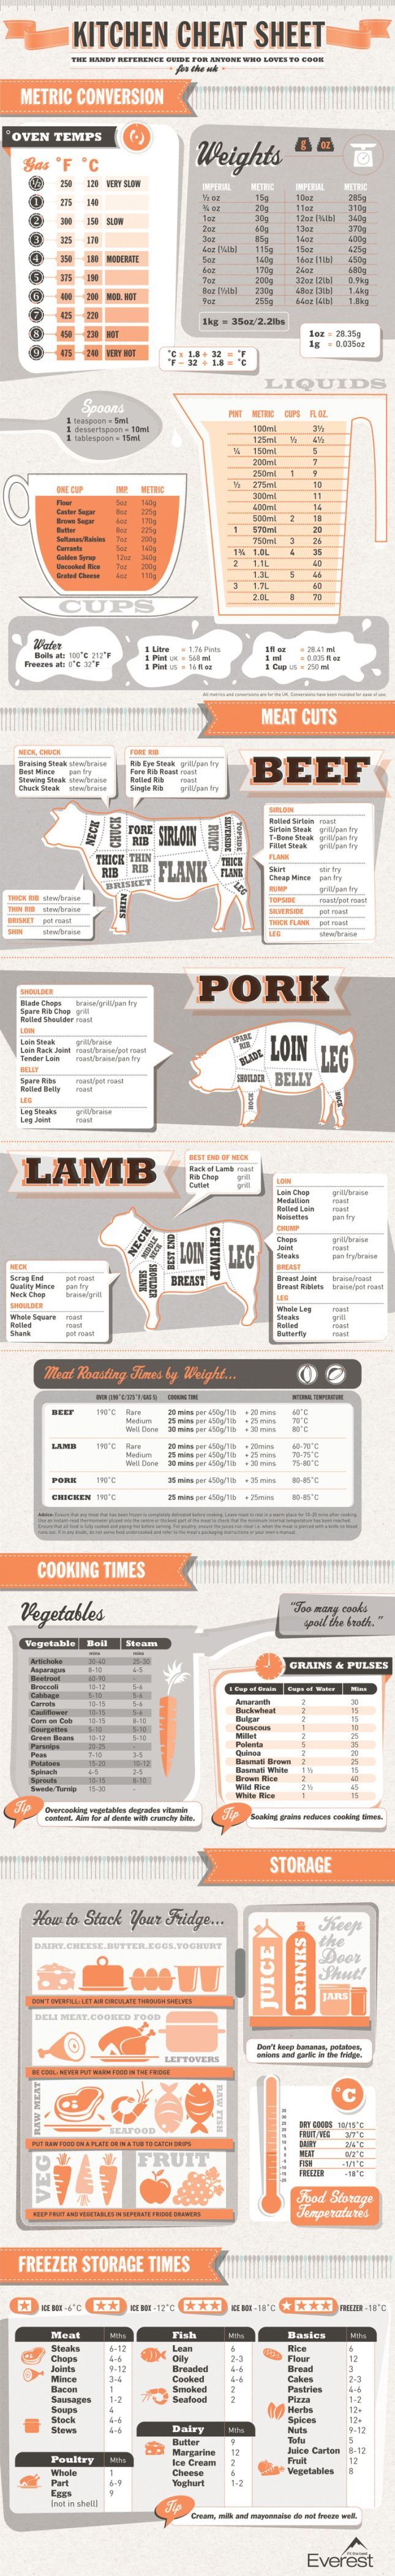 kitchen cheat sheet! Will have a copy of this in my kitchen!